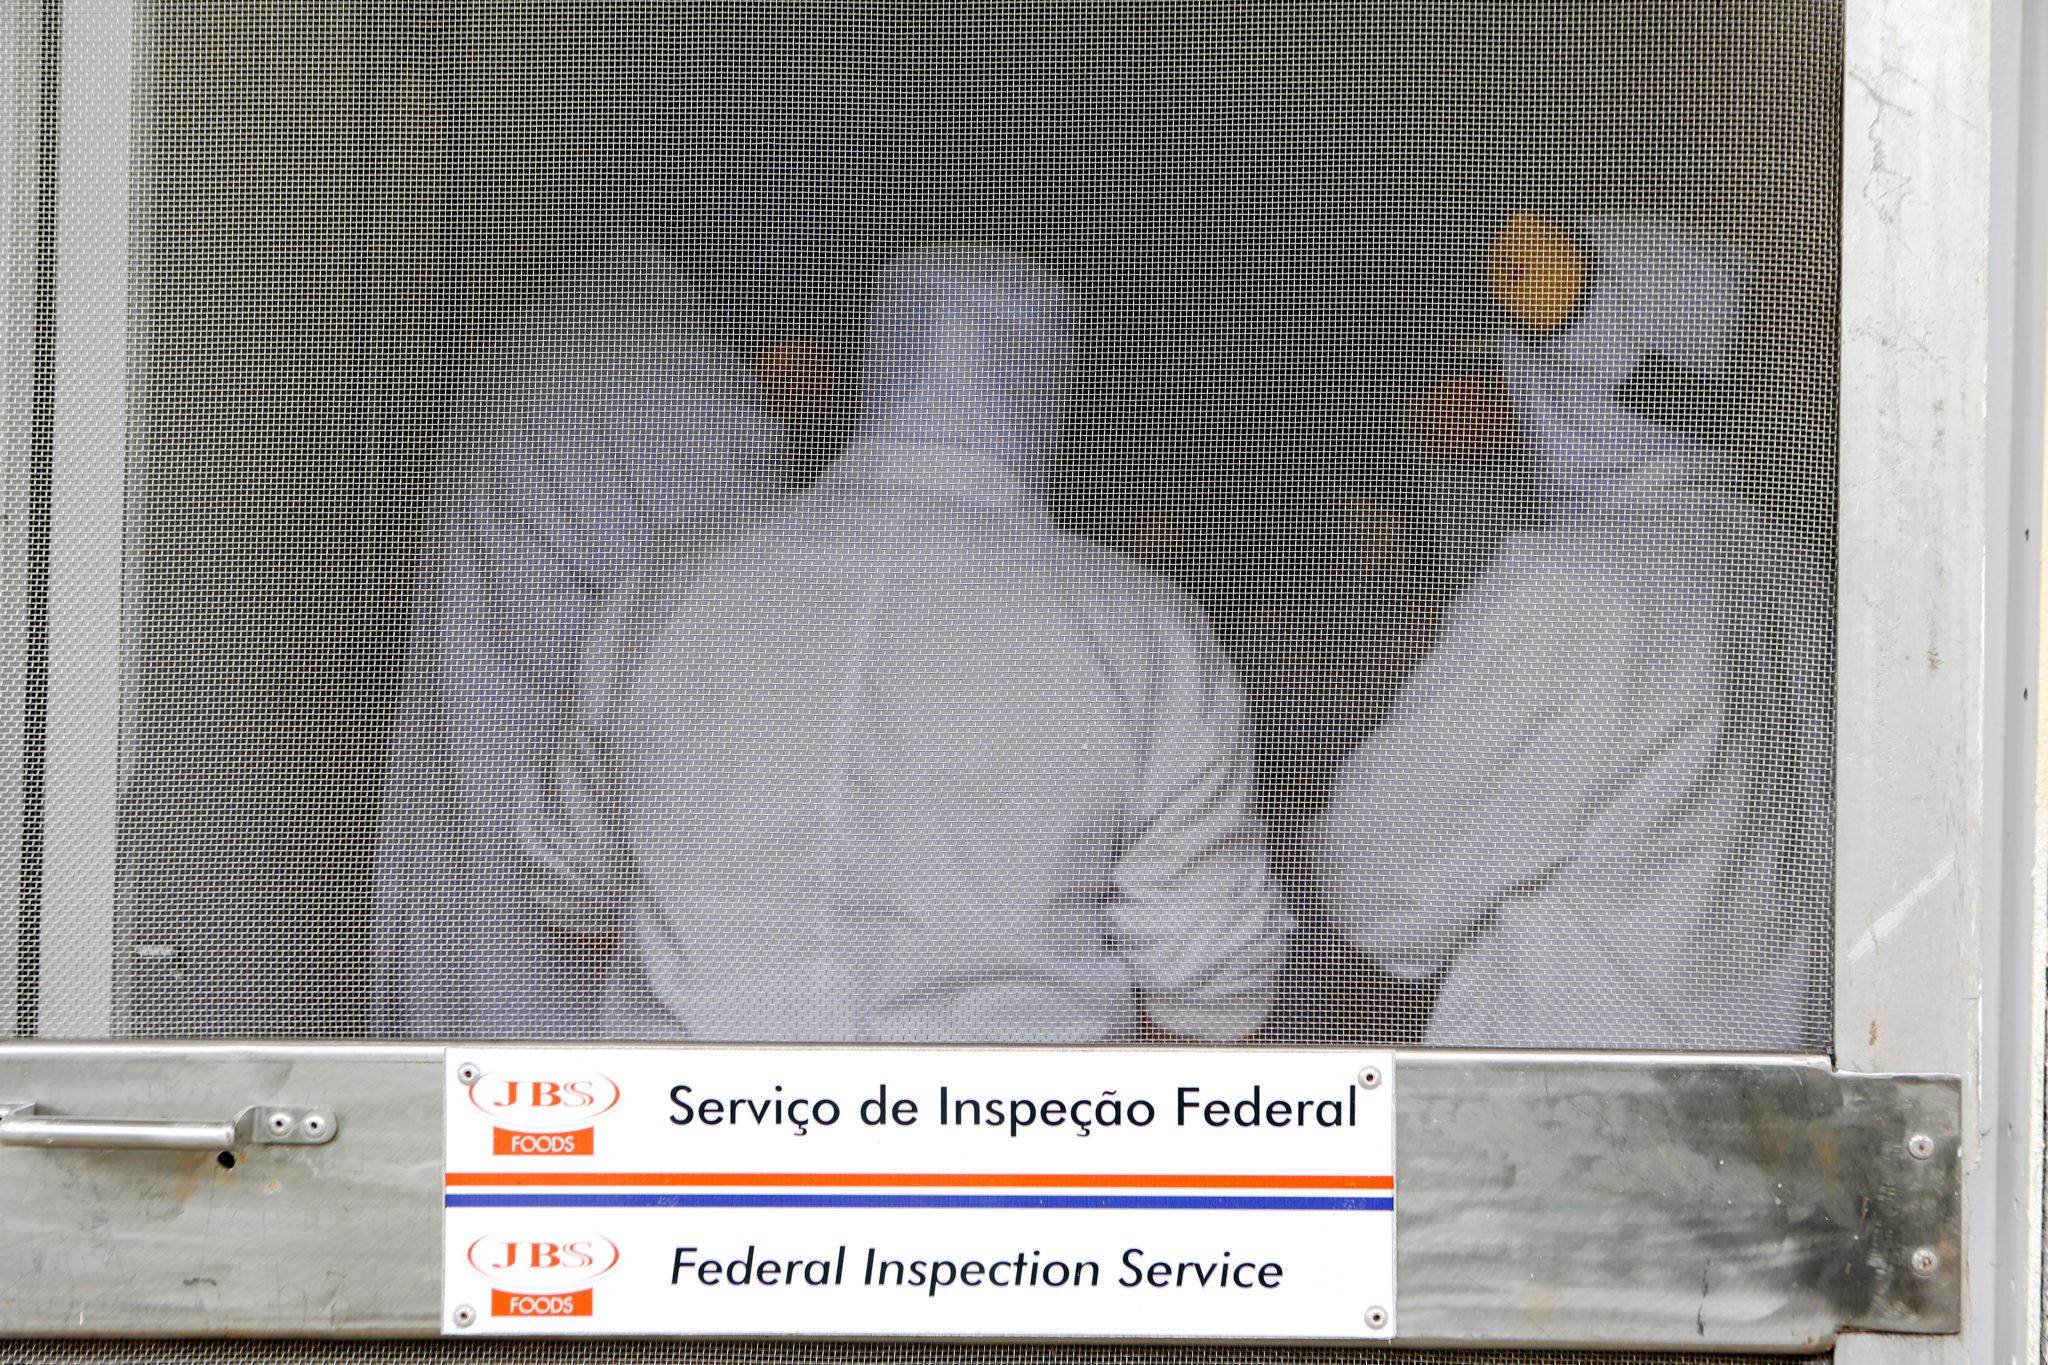 Technicians of the Brazilian Agriculture Ministry make an inspection visit to the JBS-Friboi chicken processing plant in Lapa, Parana State, Brazil on March 21, 2017.  Brazil, the world's biggest beef and poultry exporter, has been hit by stomach-churning allegations of corrupt practices in its meat industry. Police have halted exports by 21 meat processers suspected of bribing inspectors to issue them bogus health certificates for rotten meat. / AFP PHOTO / RODRIGO FONSECA